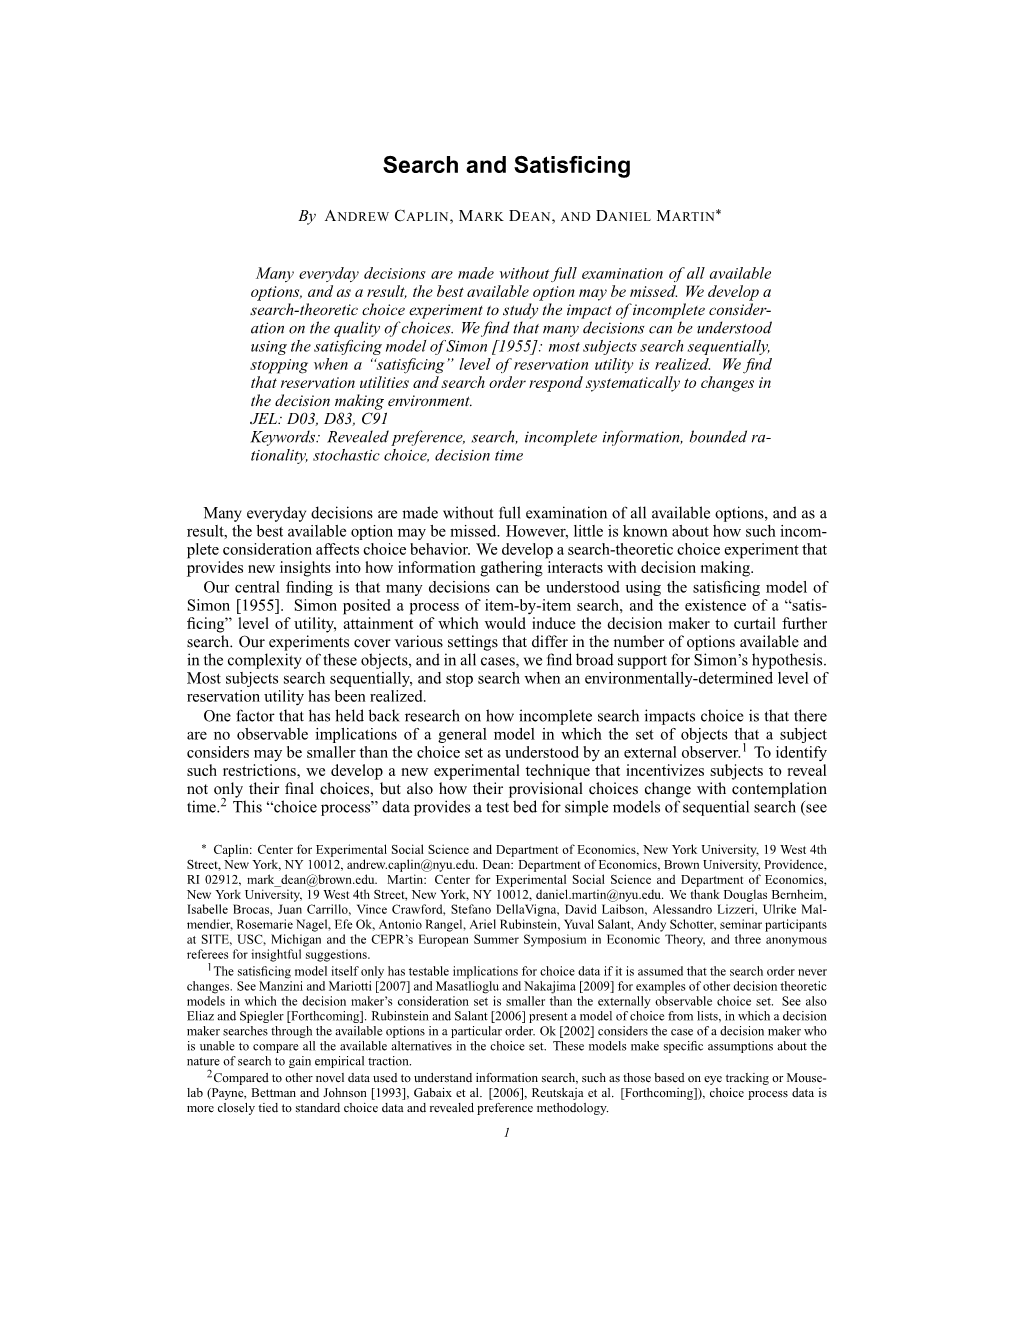 SEARCH and SATISFICING 3 Effects on Choice Are Addressed in Section IV